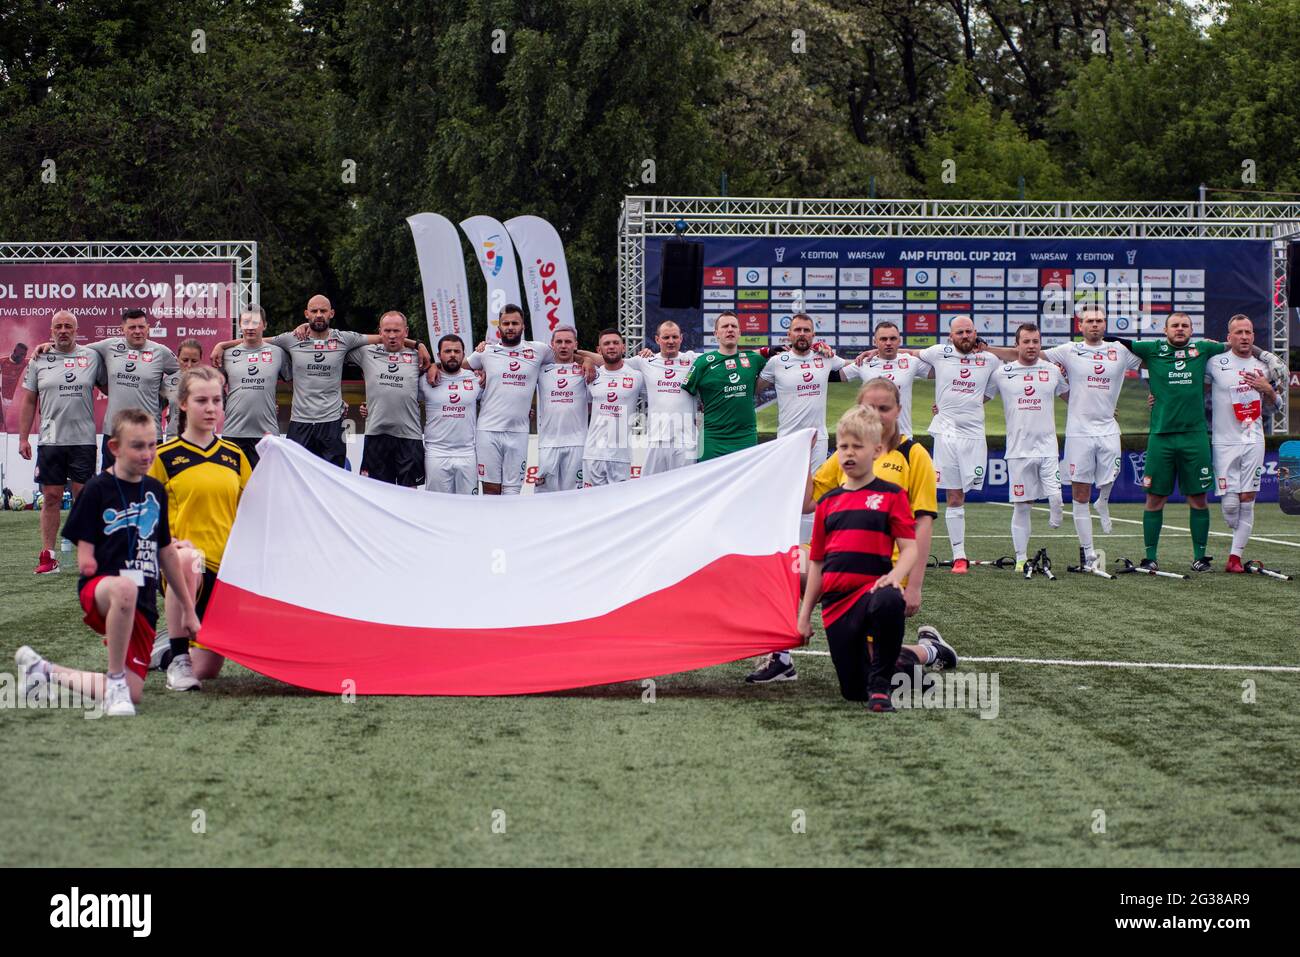 The Polish National Team seen during the national anthem before the Amp Futbol Cup 2021 between Poland and Ukraine in Warsaw June 12-13th. (Final scores, Poland 7:0 Ukraine) Stock Photo